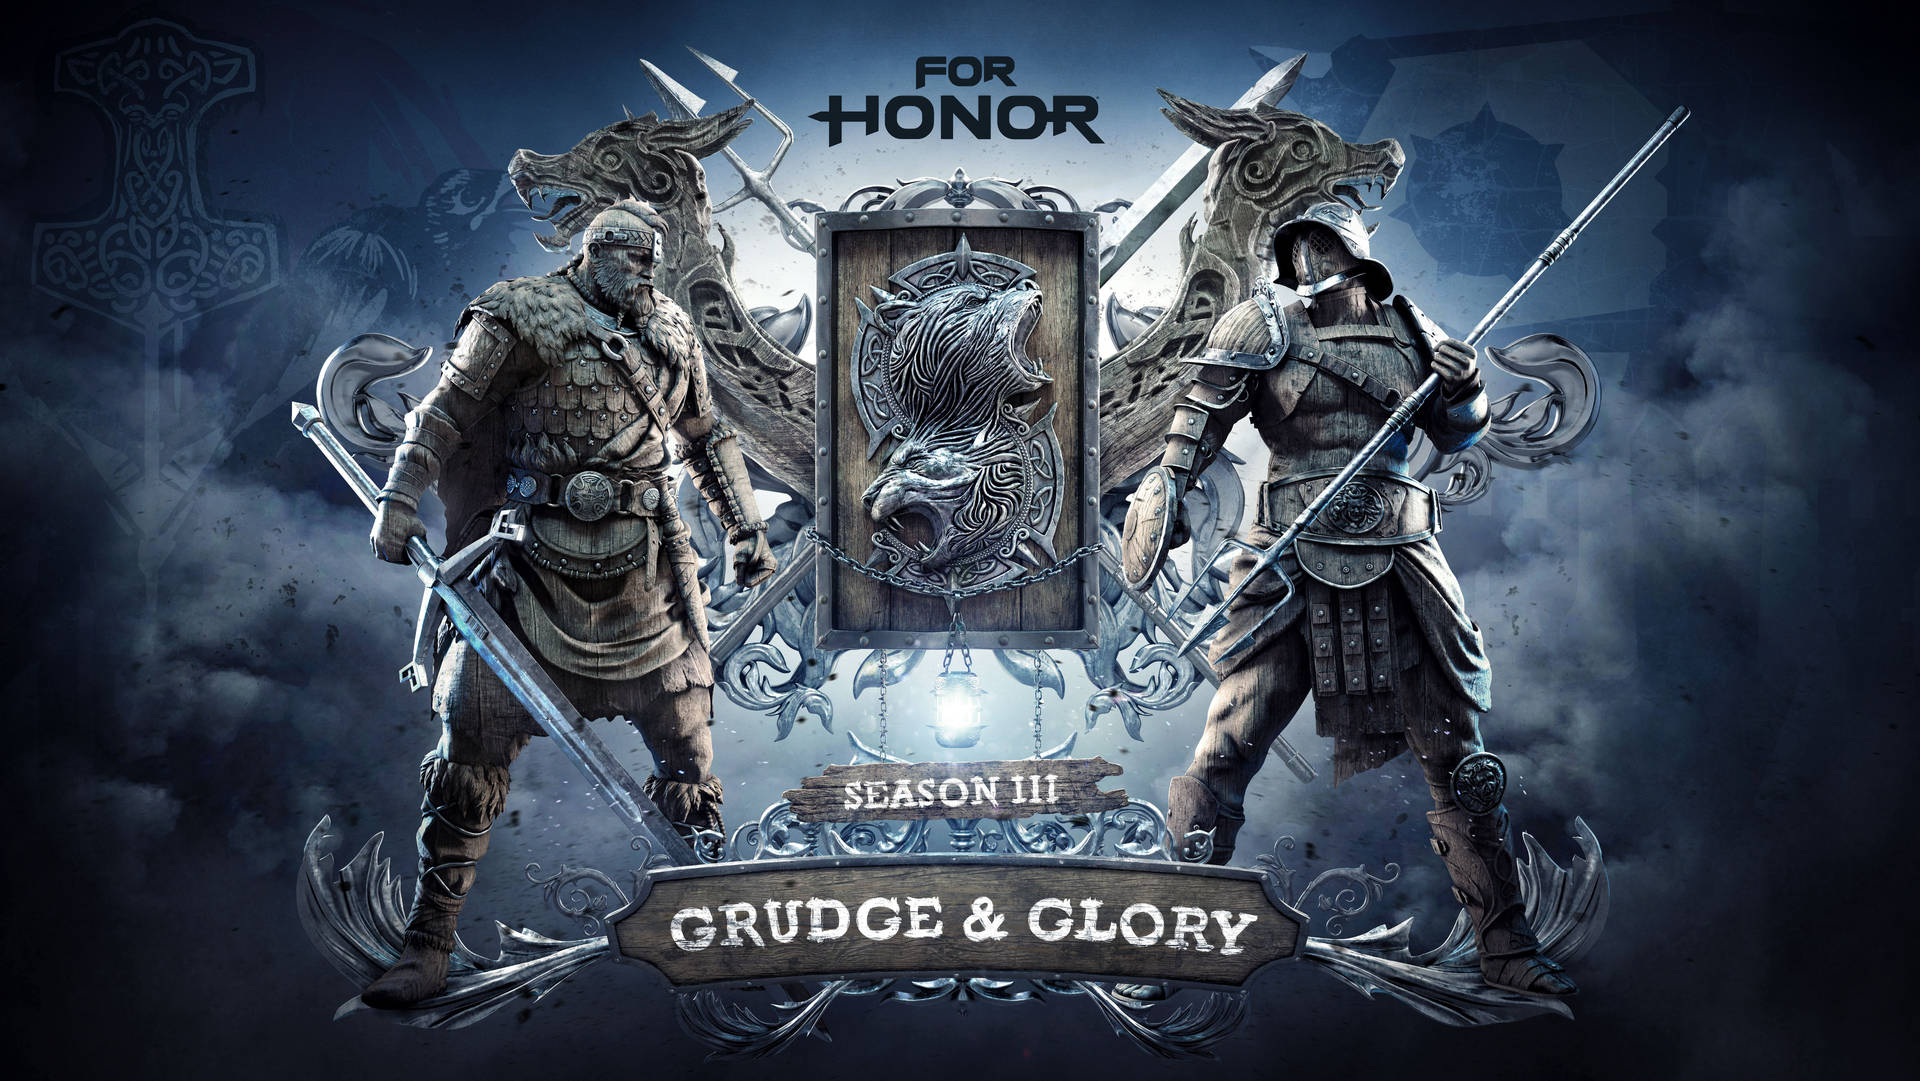 For Honor Grudge And Glory